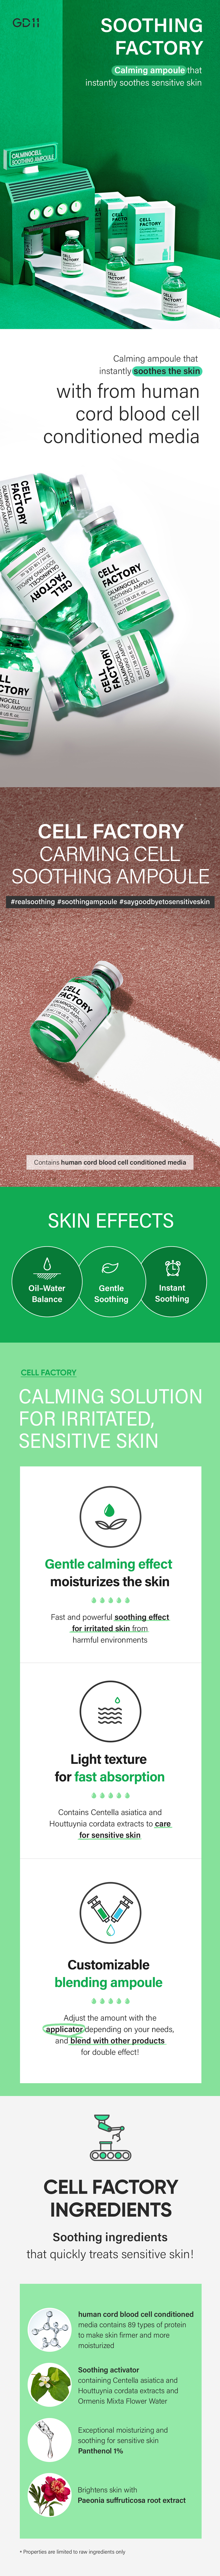 Cell Factory CALMINGCELL SOOTHING AMPOULE